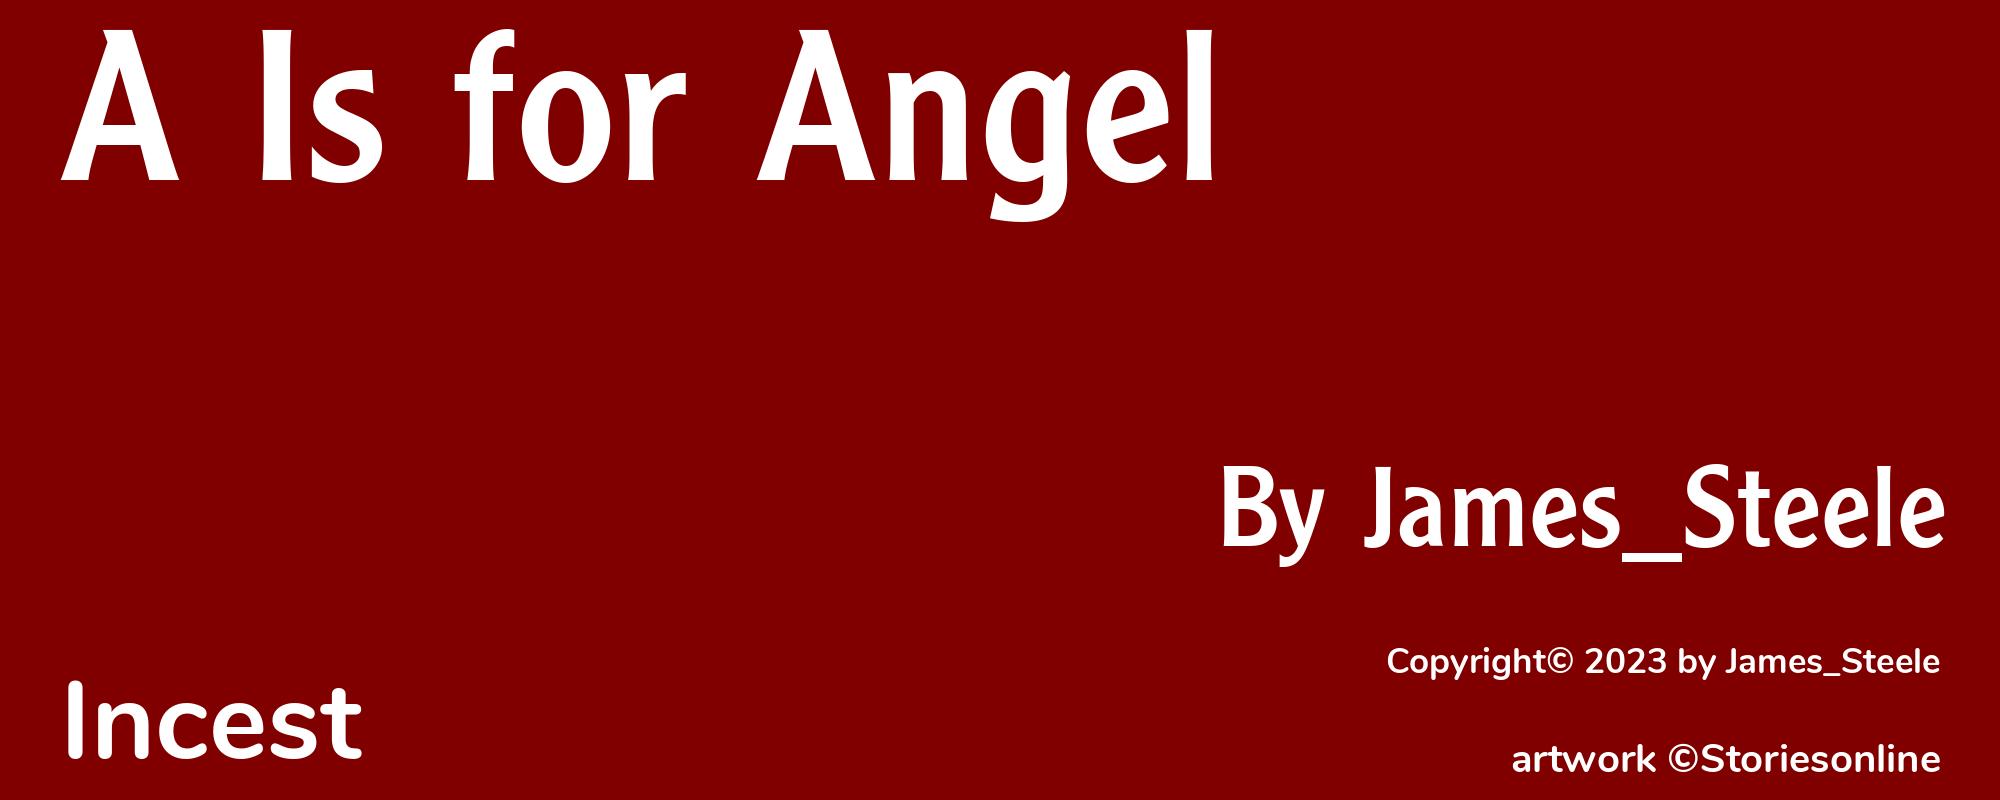 A Is for Angel - Cover